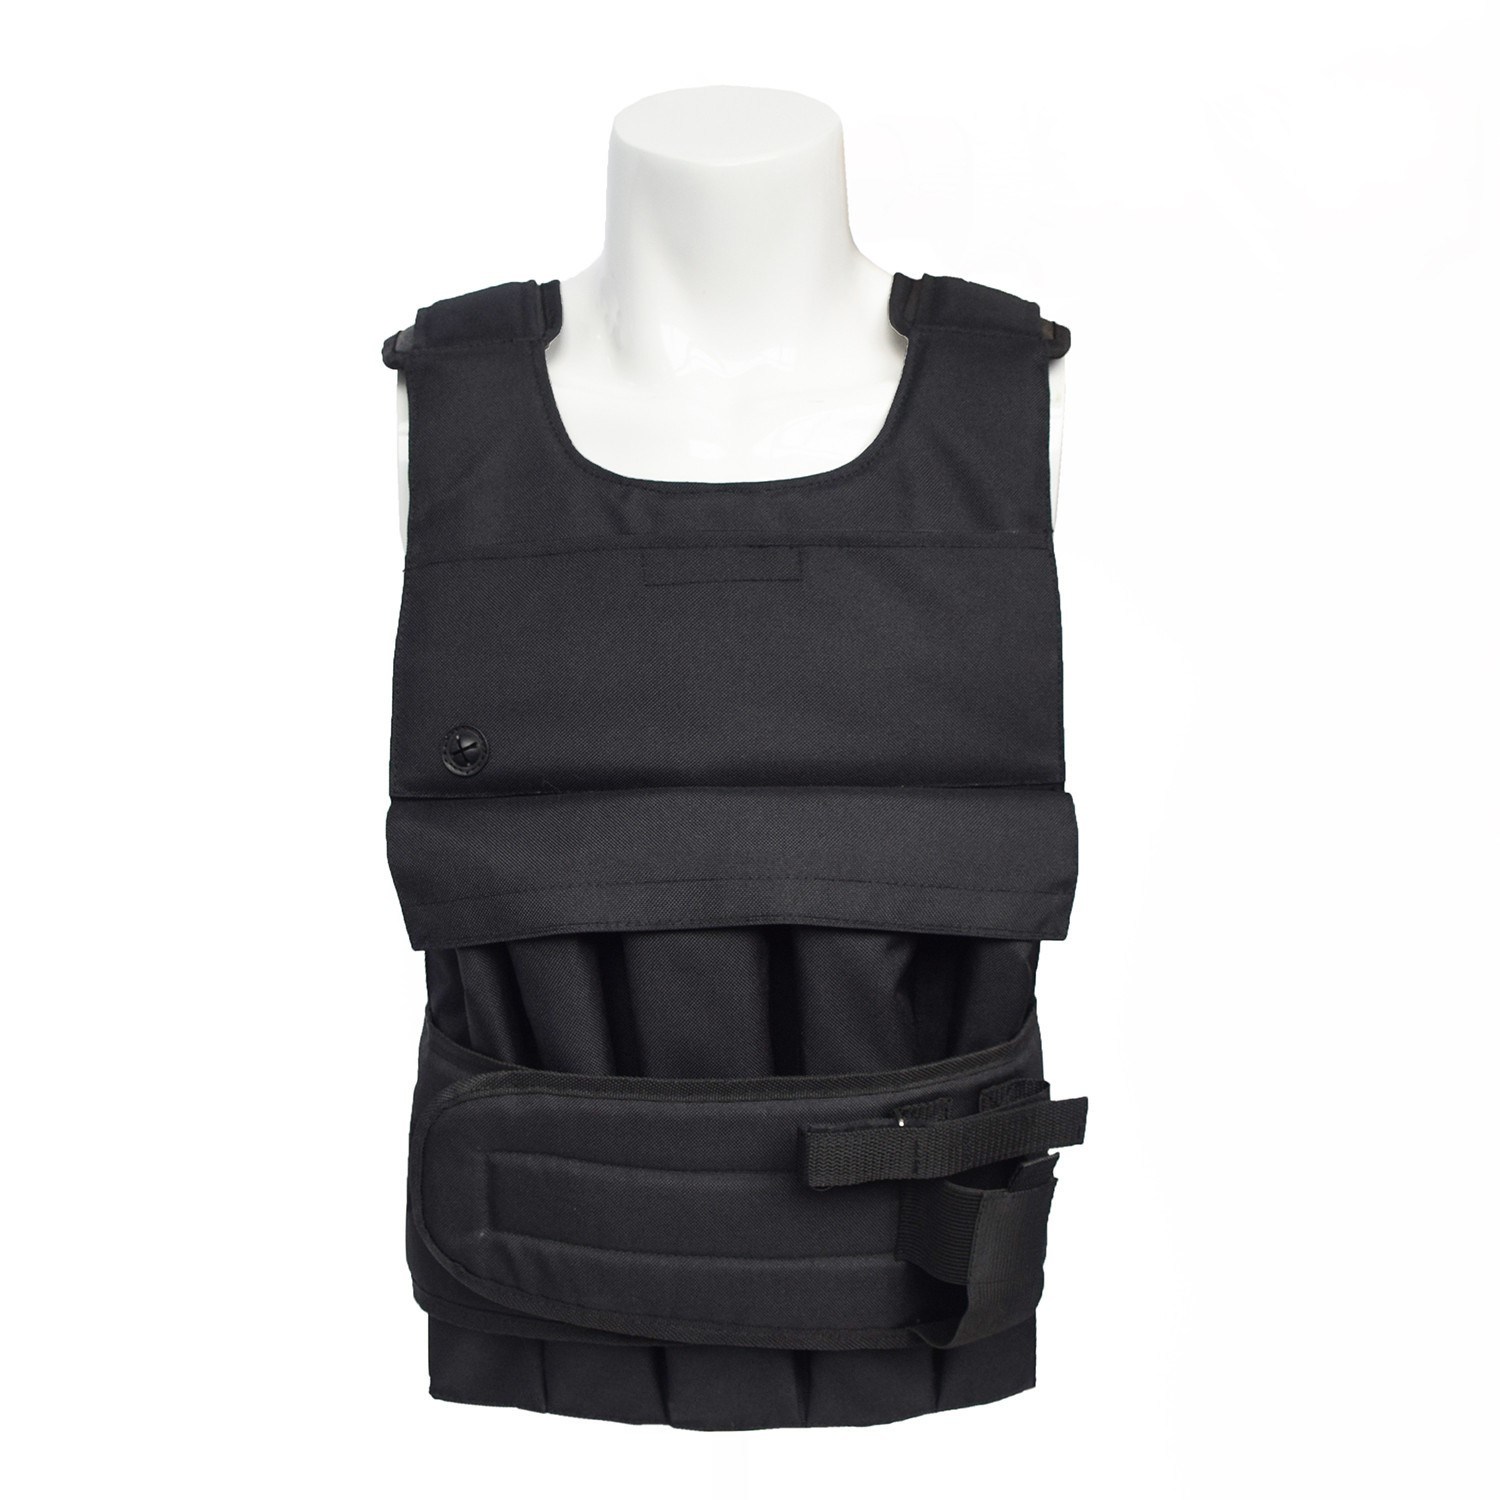 Other Police Tactical Vest Military Vest Military Green Ak47 Military Bullet Proof Vest